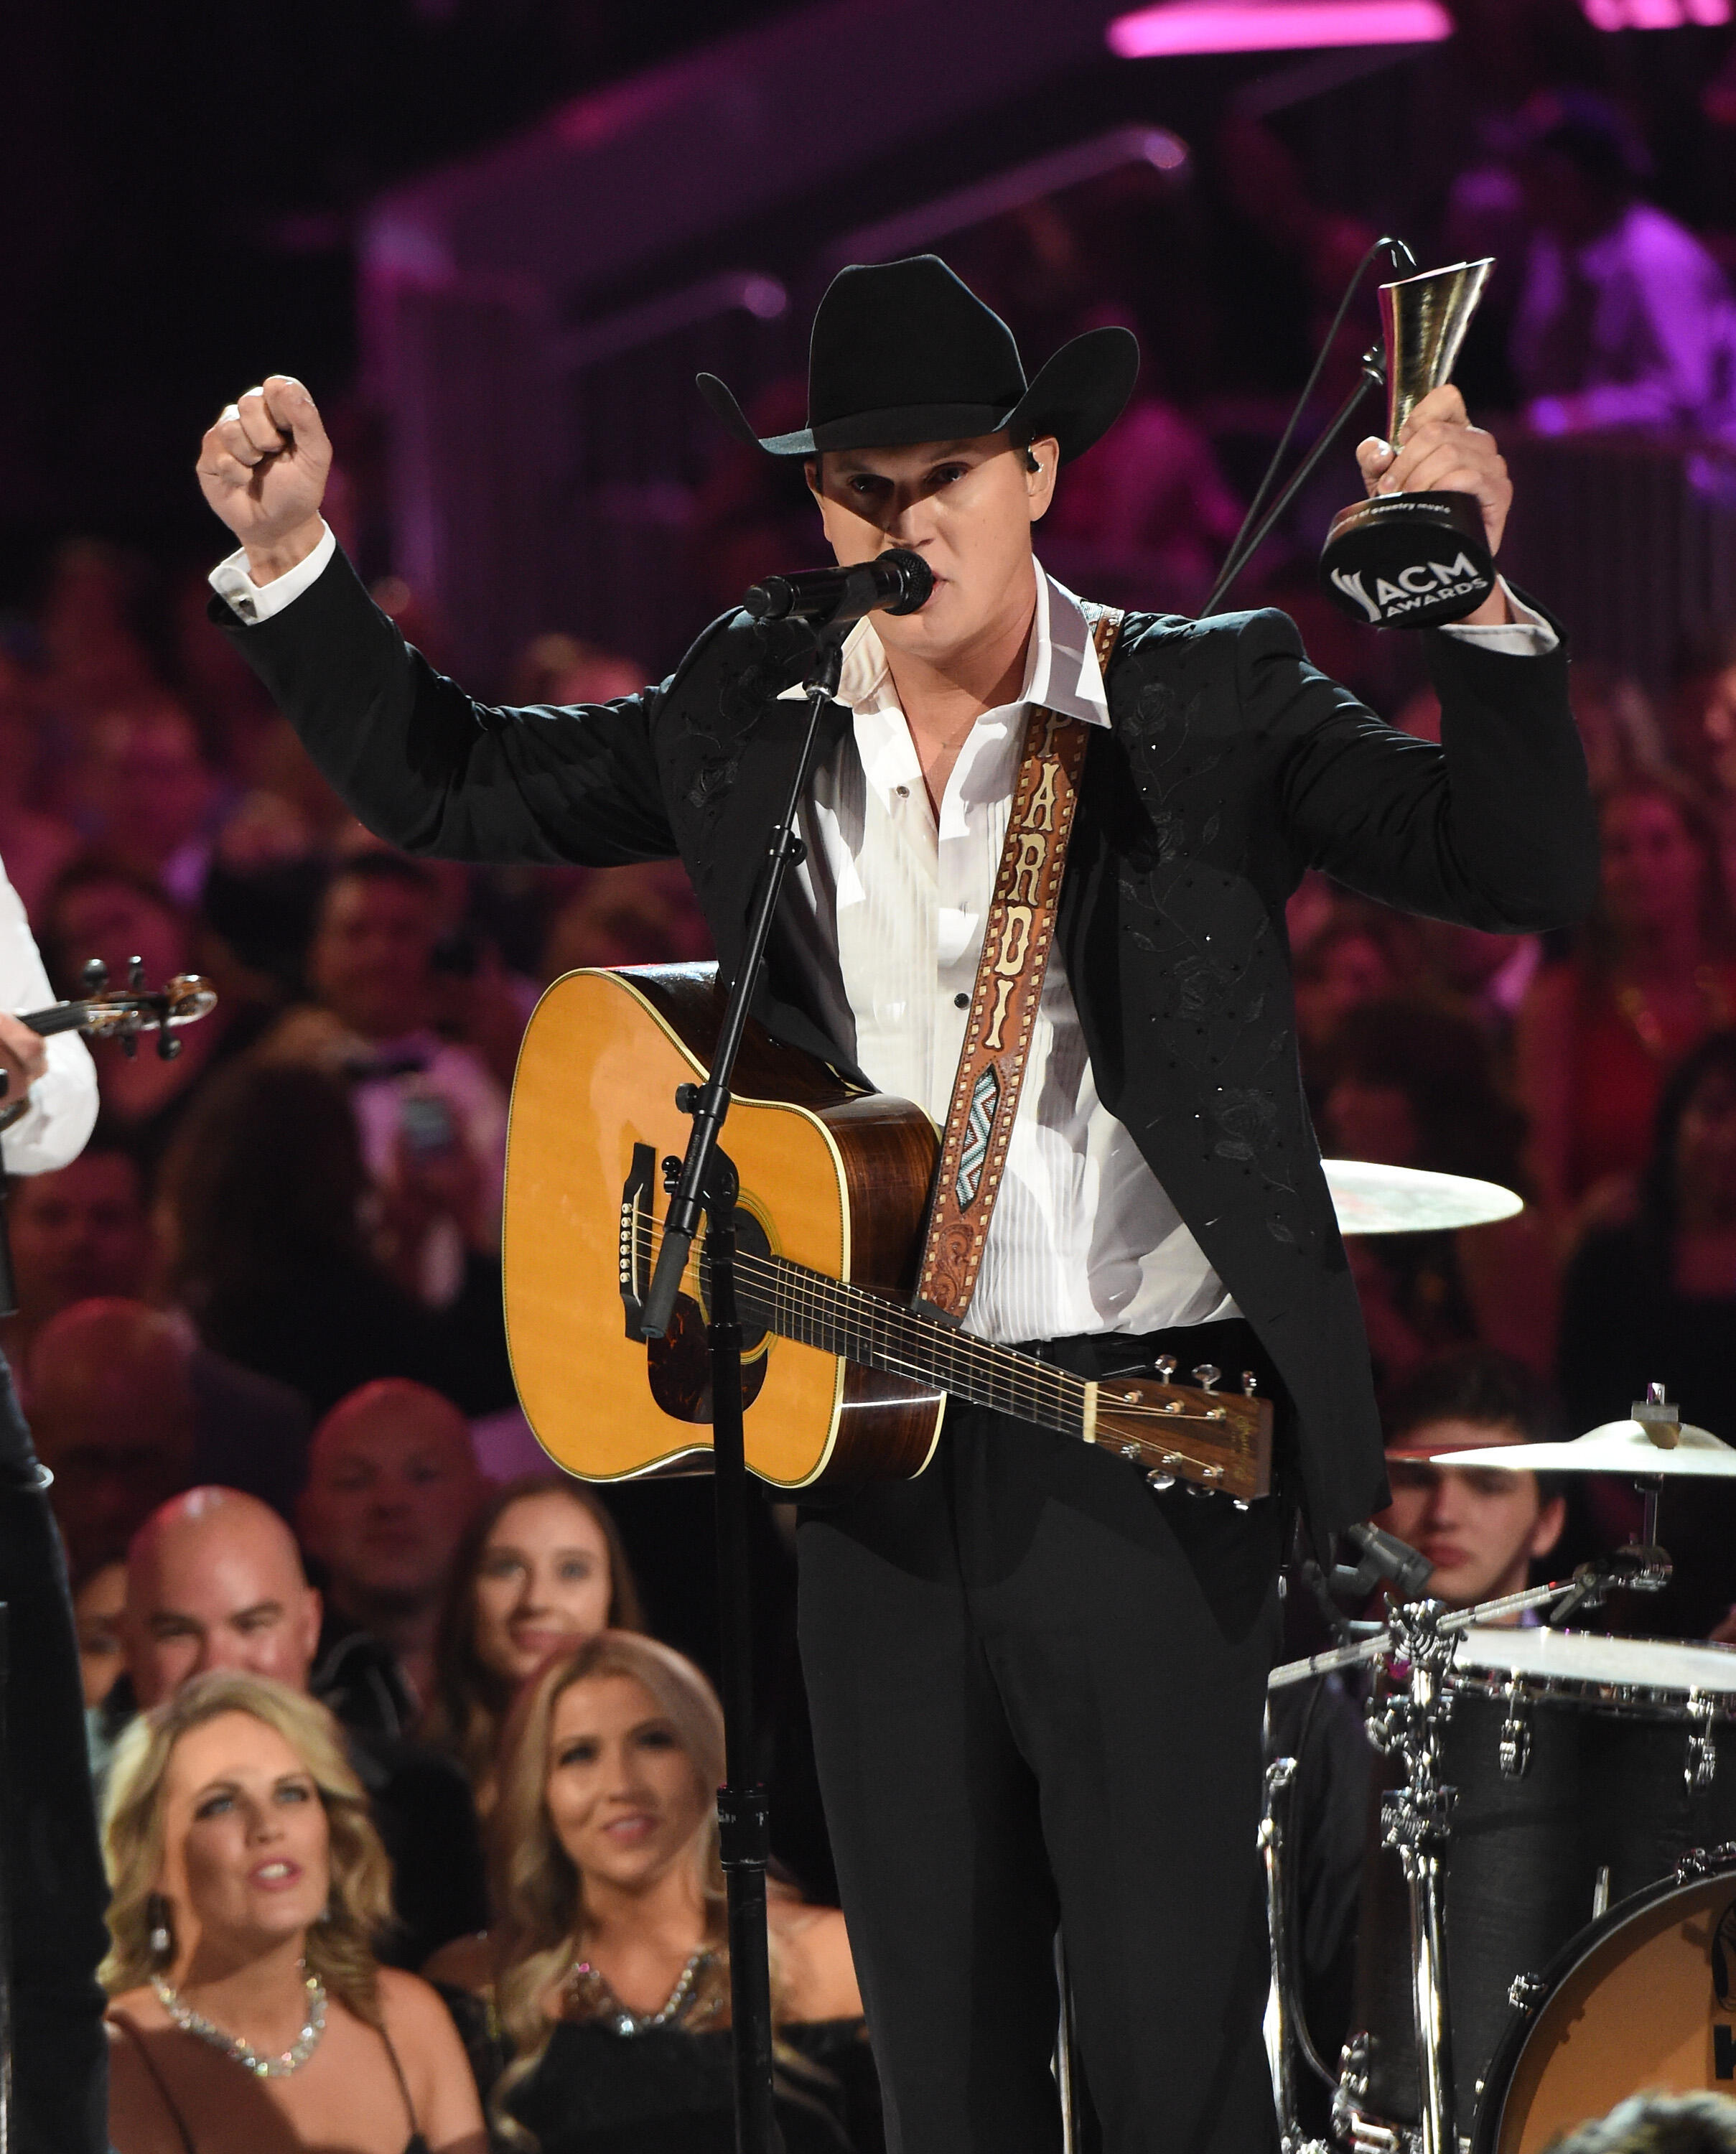 LAS VEGAS, NV - APRIL 02:  Recording artist Jon Pardi accepts the New Male Vocalist of the Year award presented by T-Mobile onstage during the 52nd Academy Of Country Music Awards at T-Mobile Arena on April 2, 2017 in Las Vegas, Nevada.  (Photo by Ethan M